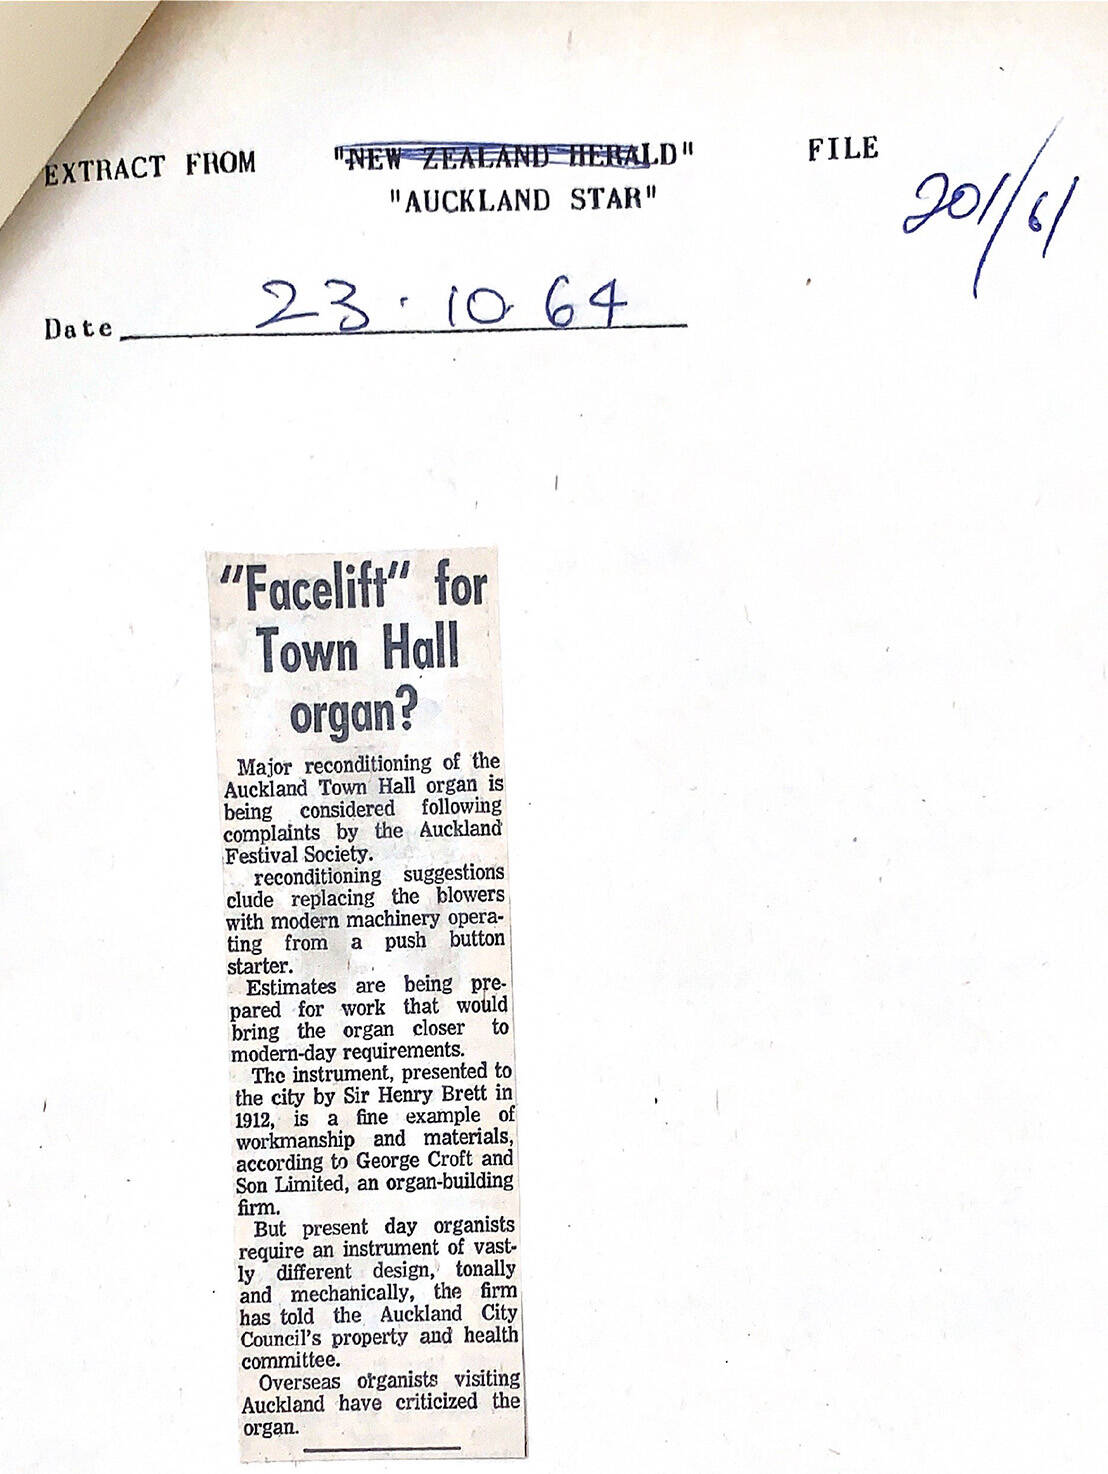 <p>Article from the Auckland Star, published 23 October 1964 | Auckland City Council Archives ACC 201/61</p>
